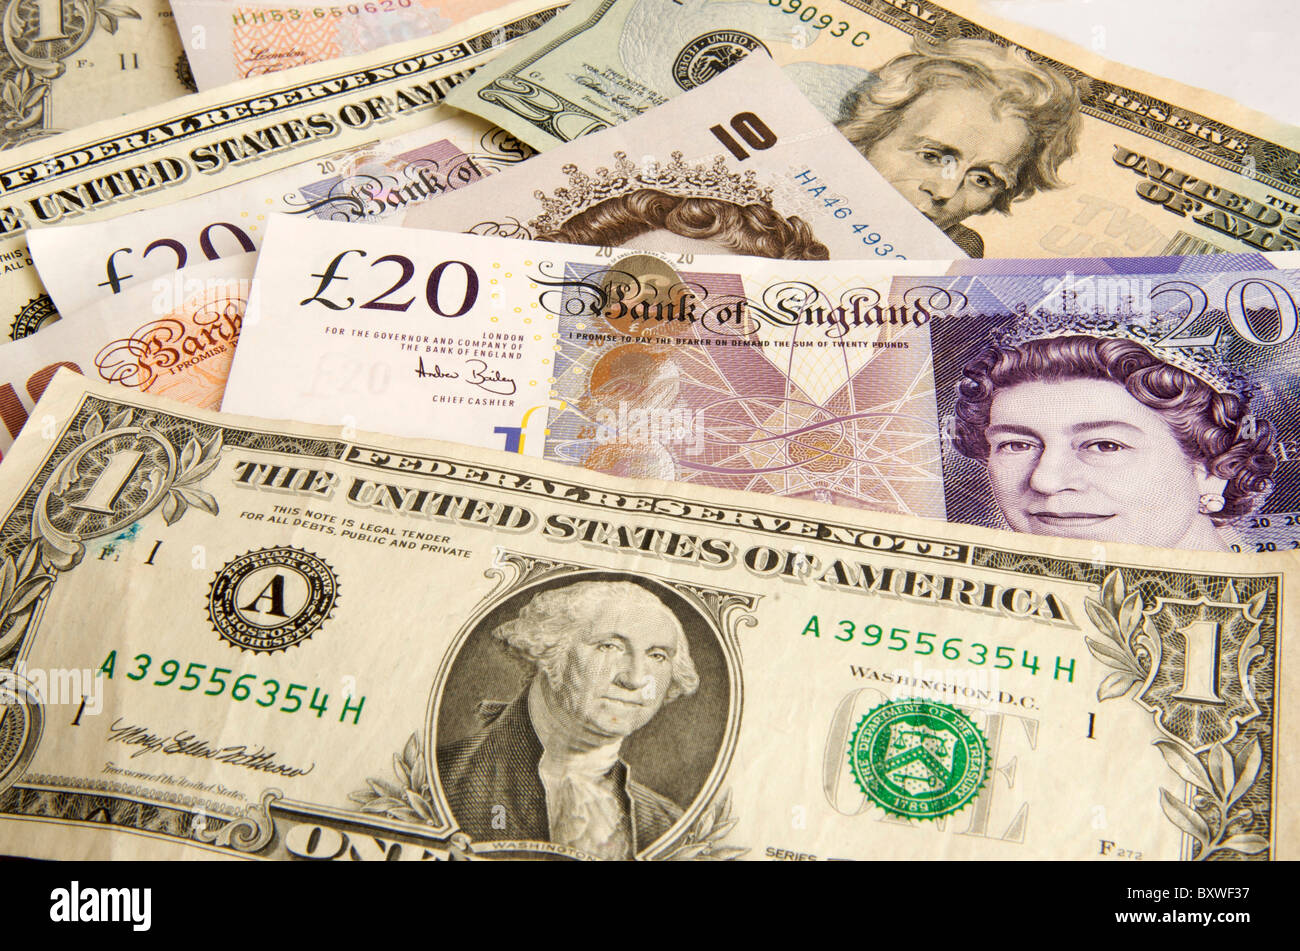 American and British currency. Stock Photo